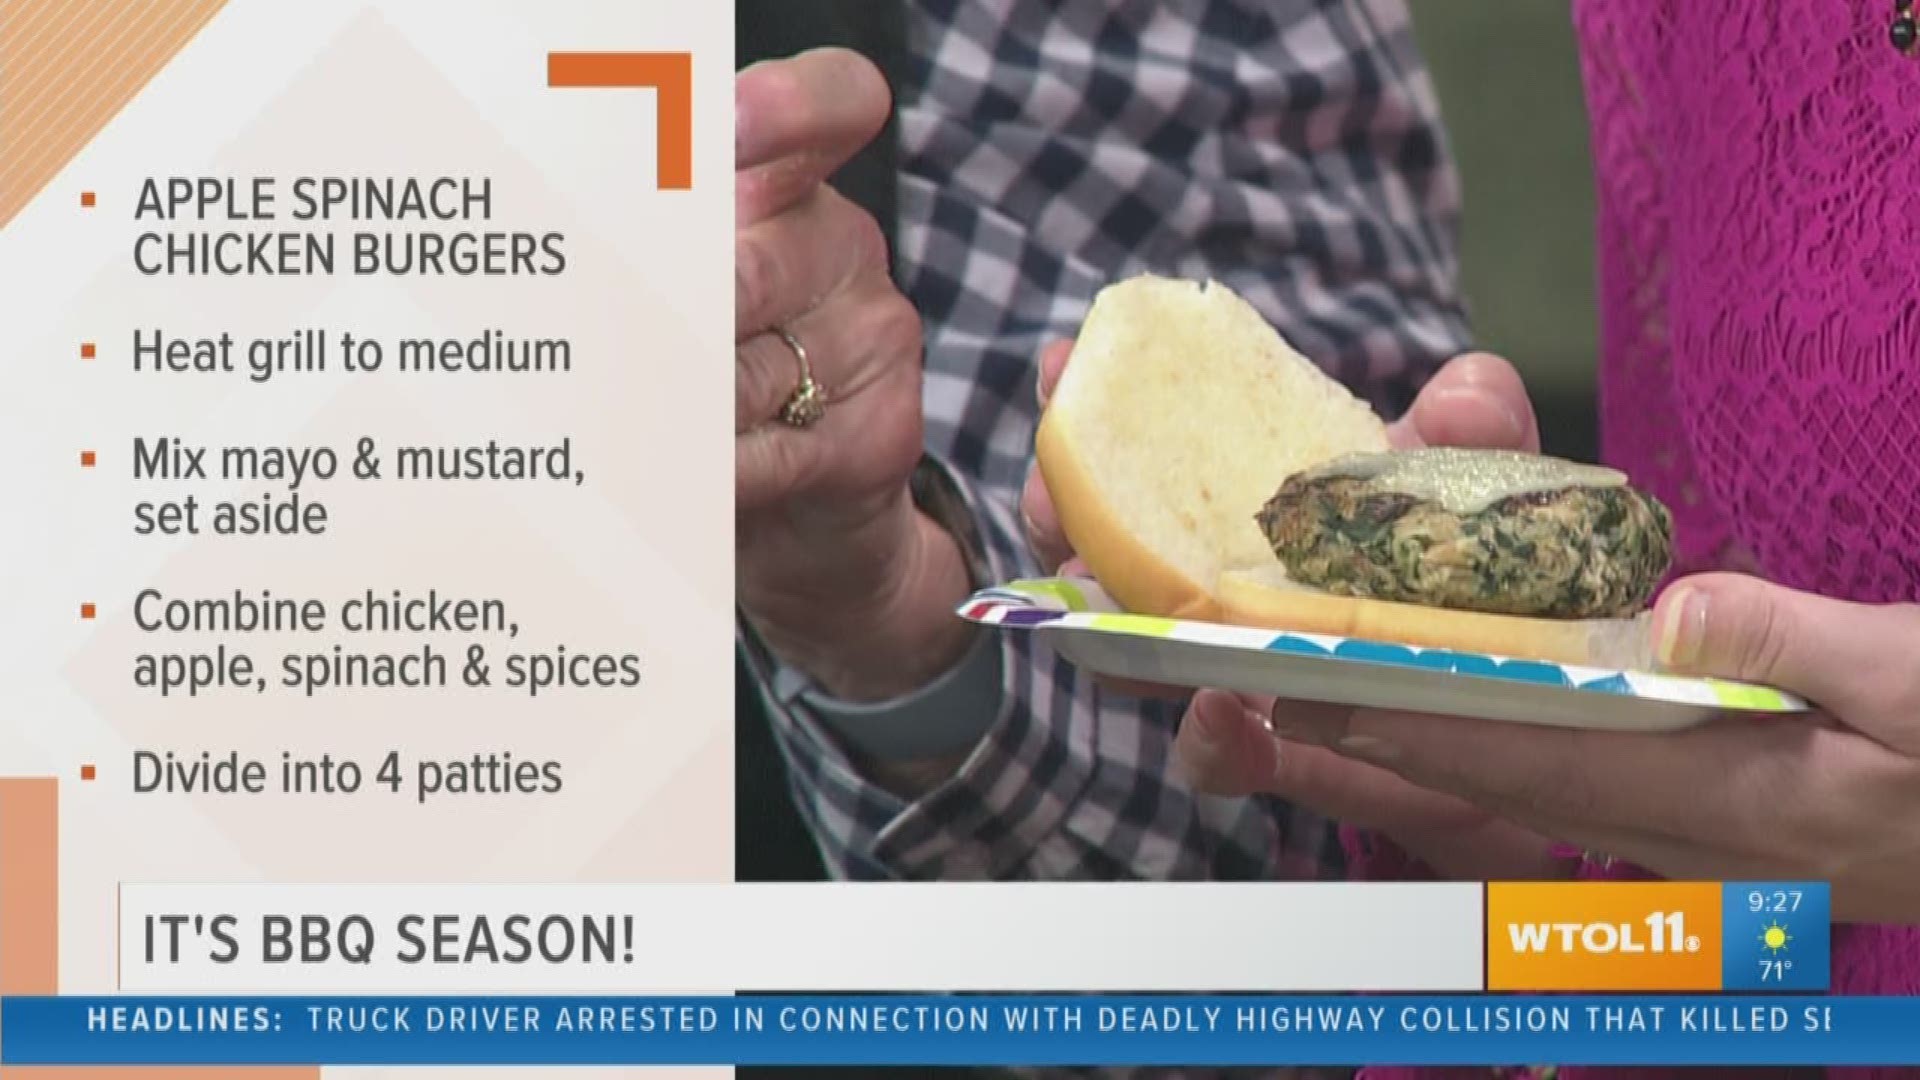 Connie Cahill gets us ready for summer with these delicious apple spinach chicken burgers that will be a hit at any event!